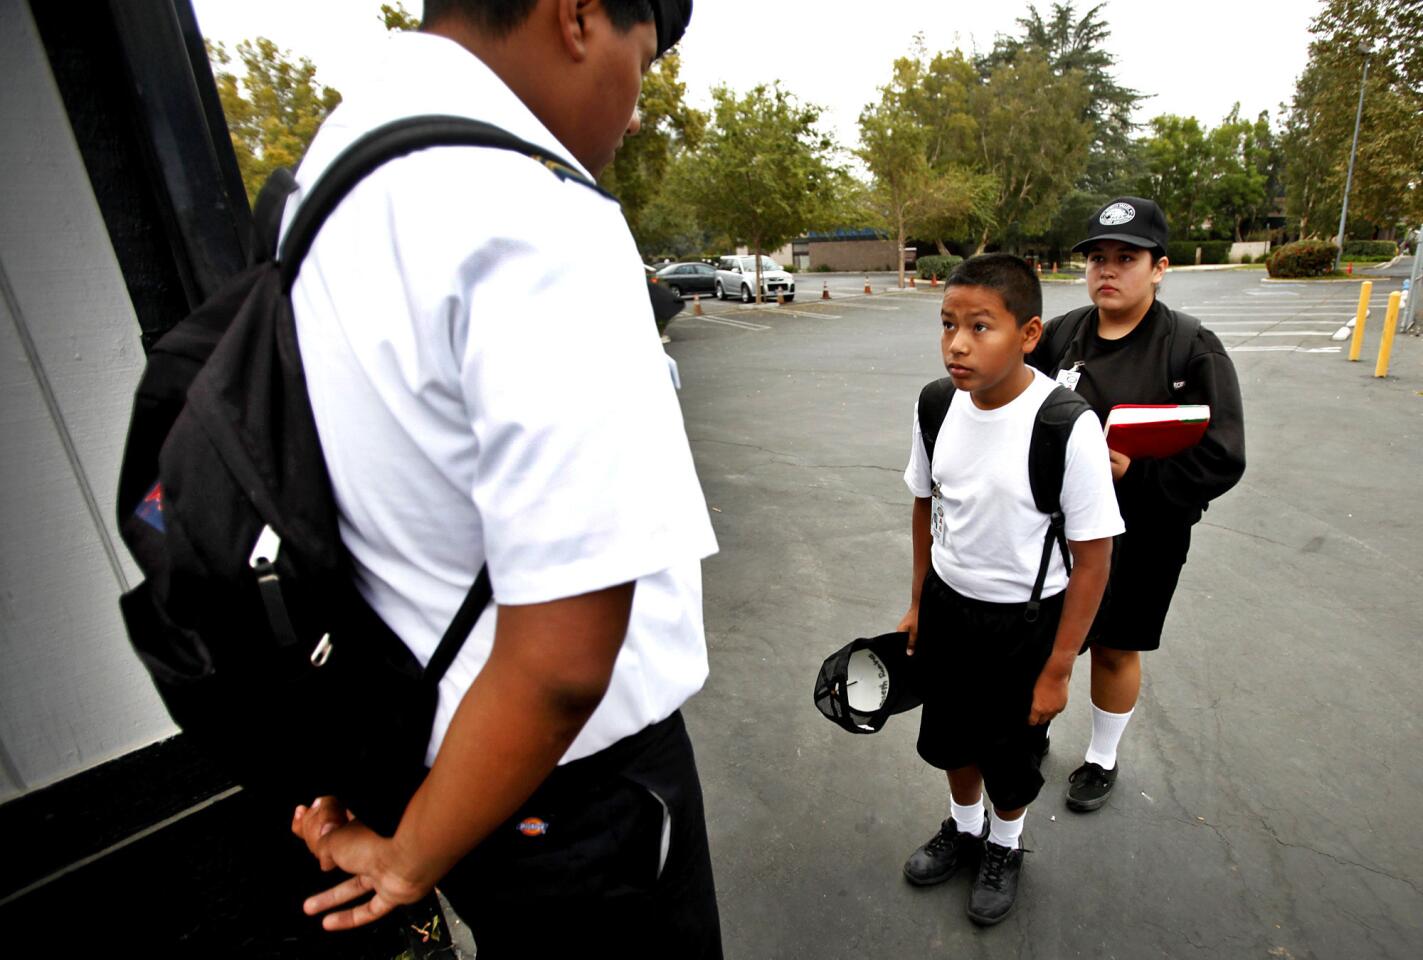 North Valley Military Institute sixth-grade student Joseph Ramirez, right, is inspected by 10th-grade student Robert Ramirez, left, before being allowed to enter the campus at the start of the school day on Oct. 2.